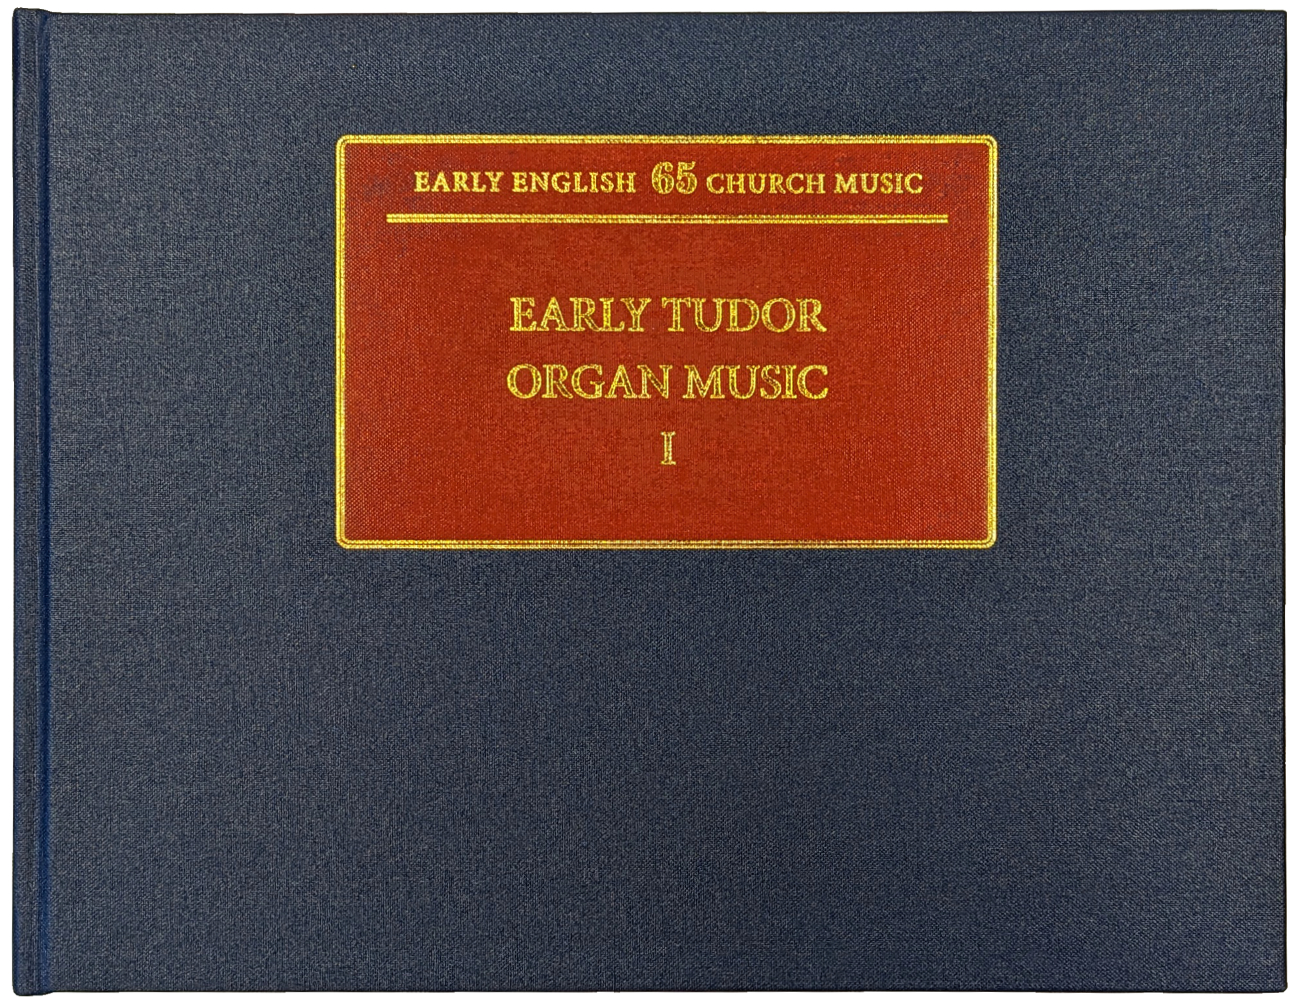 Early Tudor Organ Music Vol 1 published by Stainer and Bell